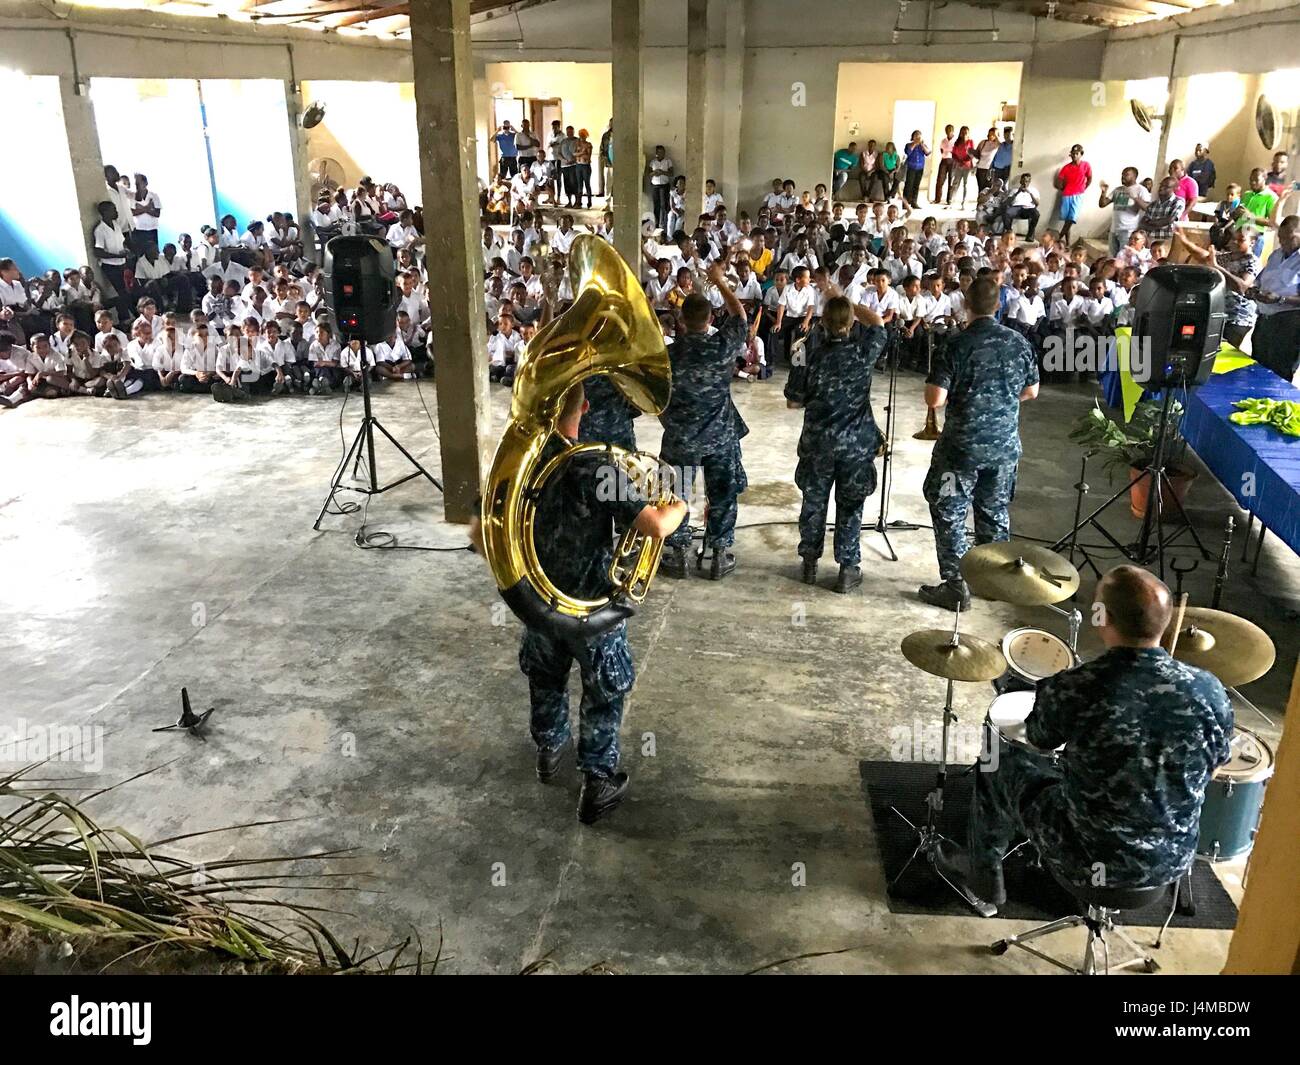 170222-N-YL073-001   SANTA FE, Honduras (Feb. 22, 2017) Members of the U.S. Fleet Forces (USFF) Band perform for host nation school children in support of Continuing Promise 2017 (CP-17) in Sante Fe, Honduras. CP-17 is a U.S. Southern Command-sponsored and U.S. Naval Forces Southern Command/U.S. 4th Fleet-conducted deployment to conduct civil-military operations including humanitarian assistance, training engagements, and medical, dental, and veterinary support to Central and South America. (U.S. Navy photo by Mass Communication Specialist 2nd Class Shamira Purifoy) Stock Photo